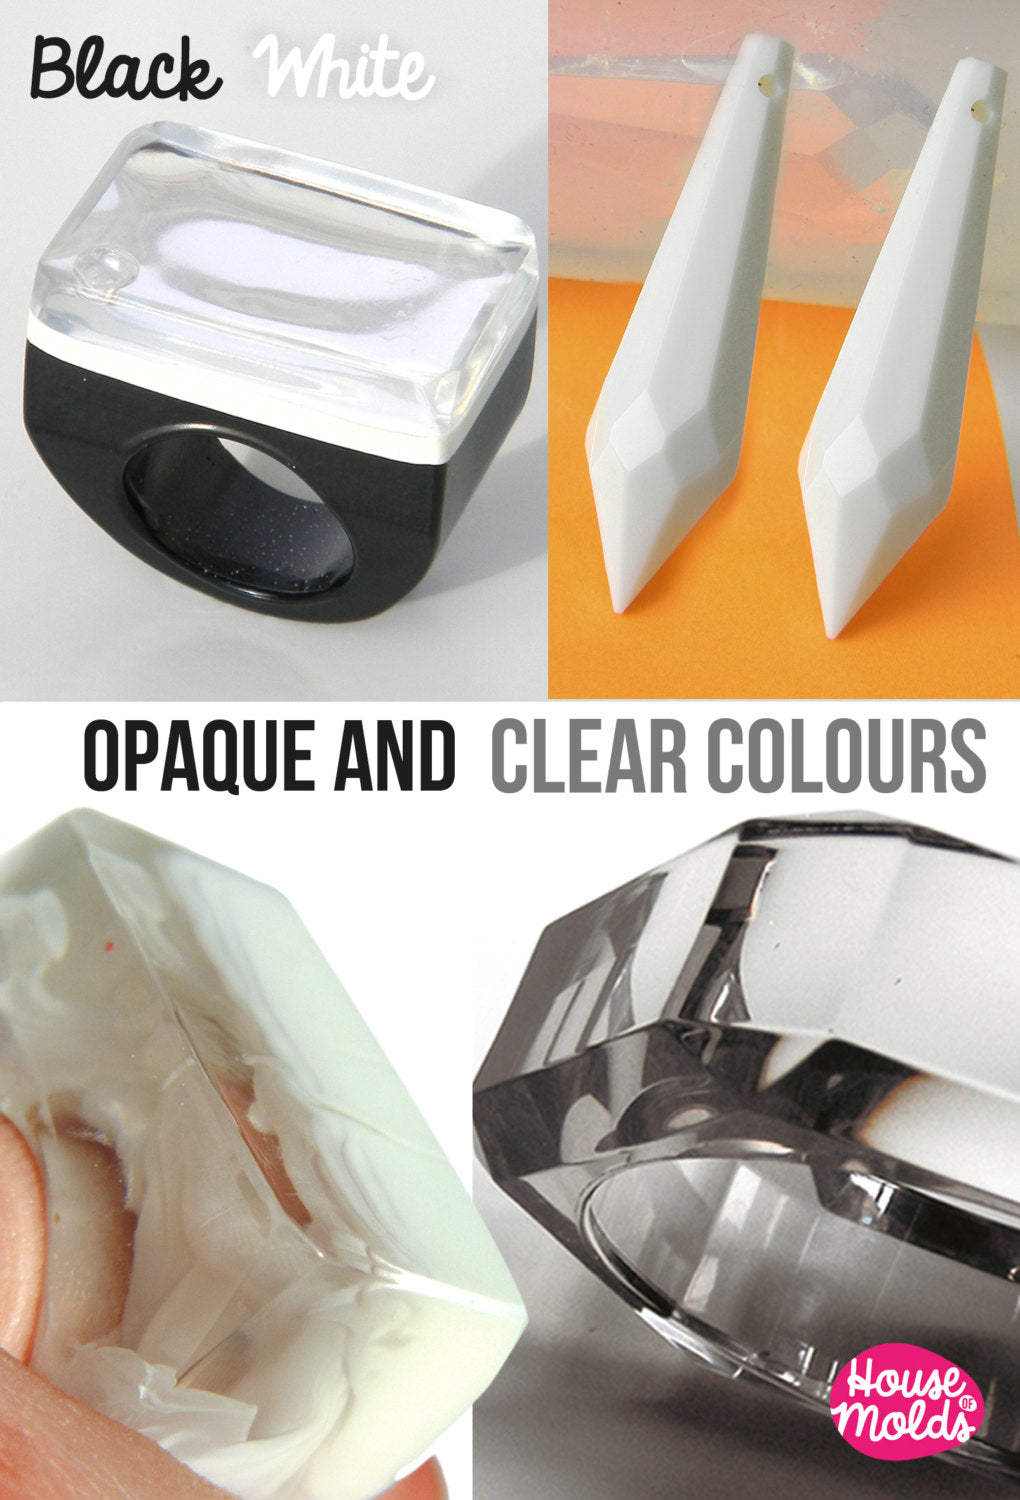 Solid and Clear Professional Resin Colour Kit of 5 -make Opaque